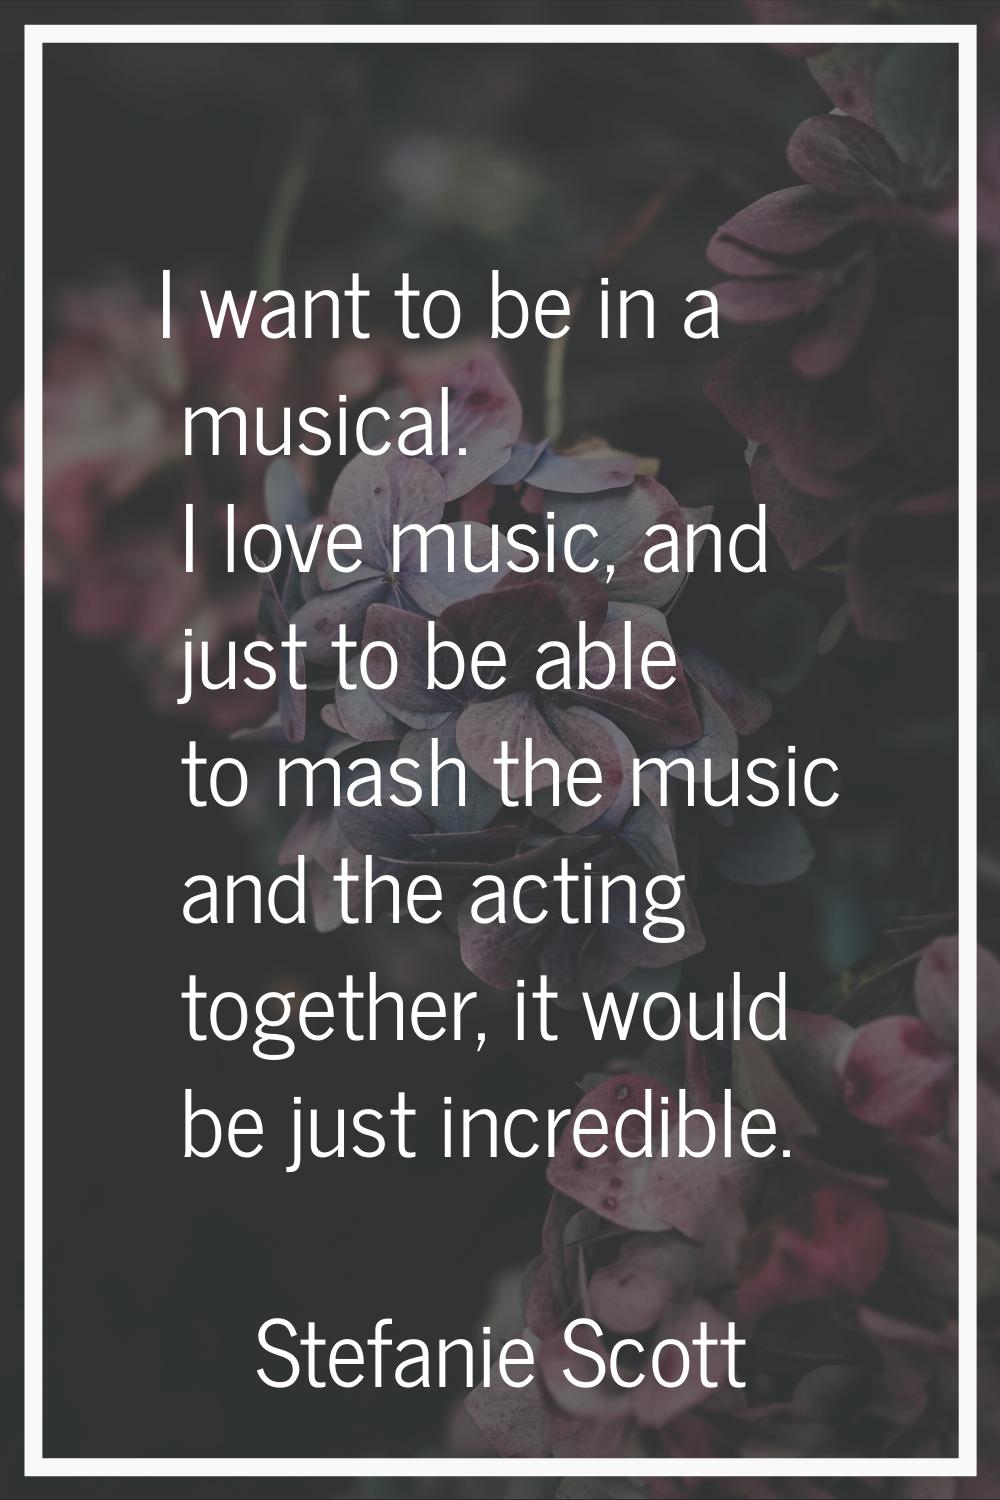 I want to be in a musical. I love music, and just to be able to mash the music and the acting toget